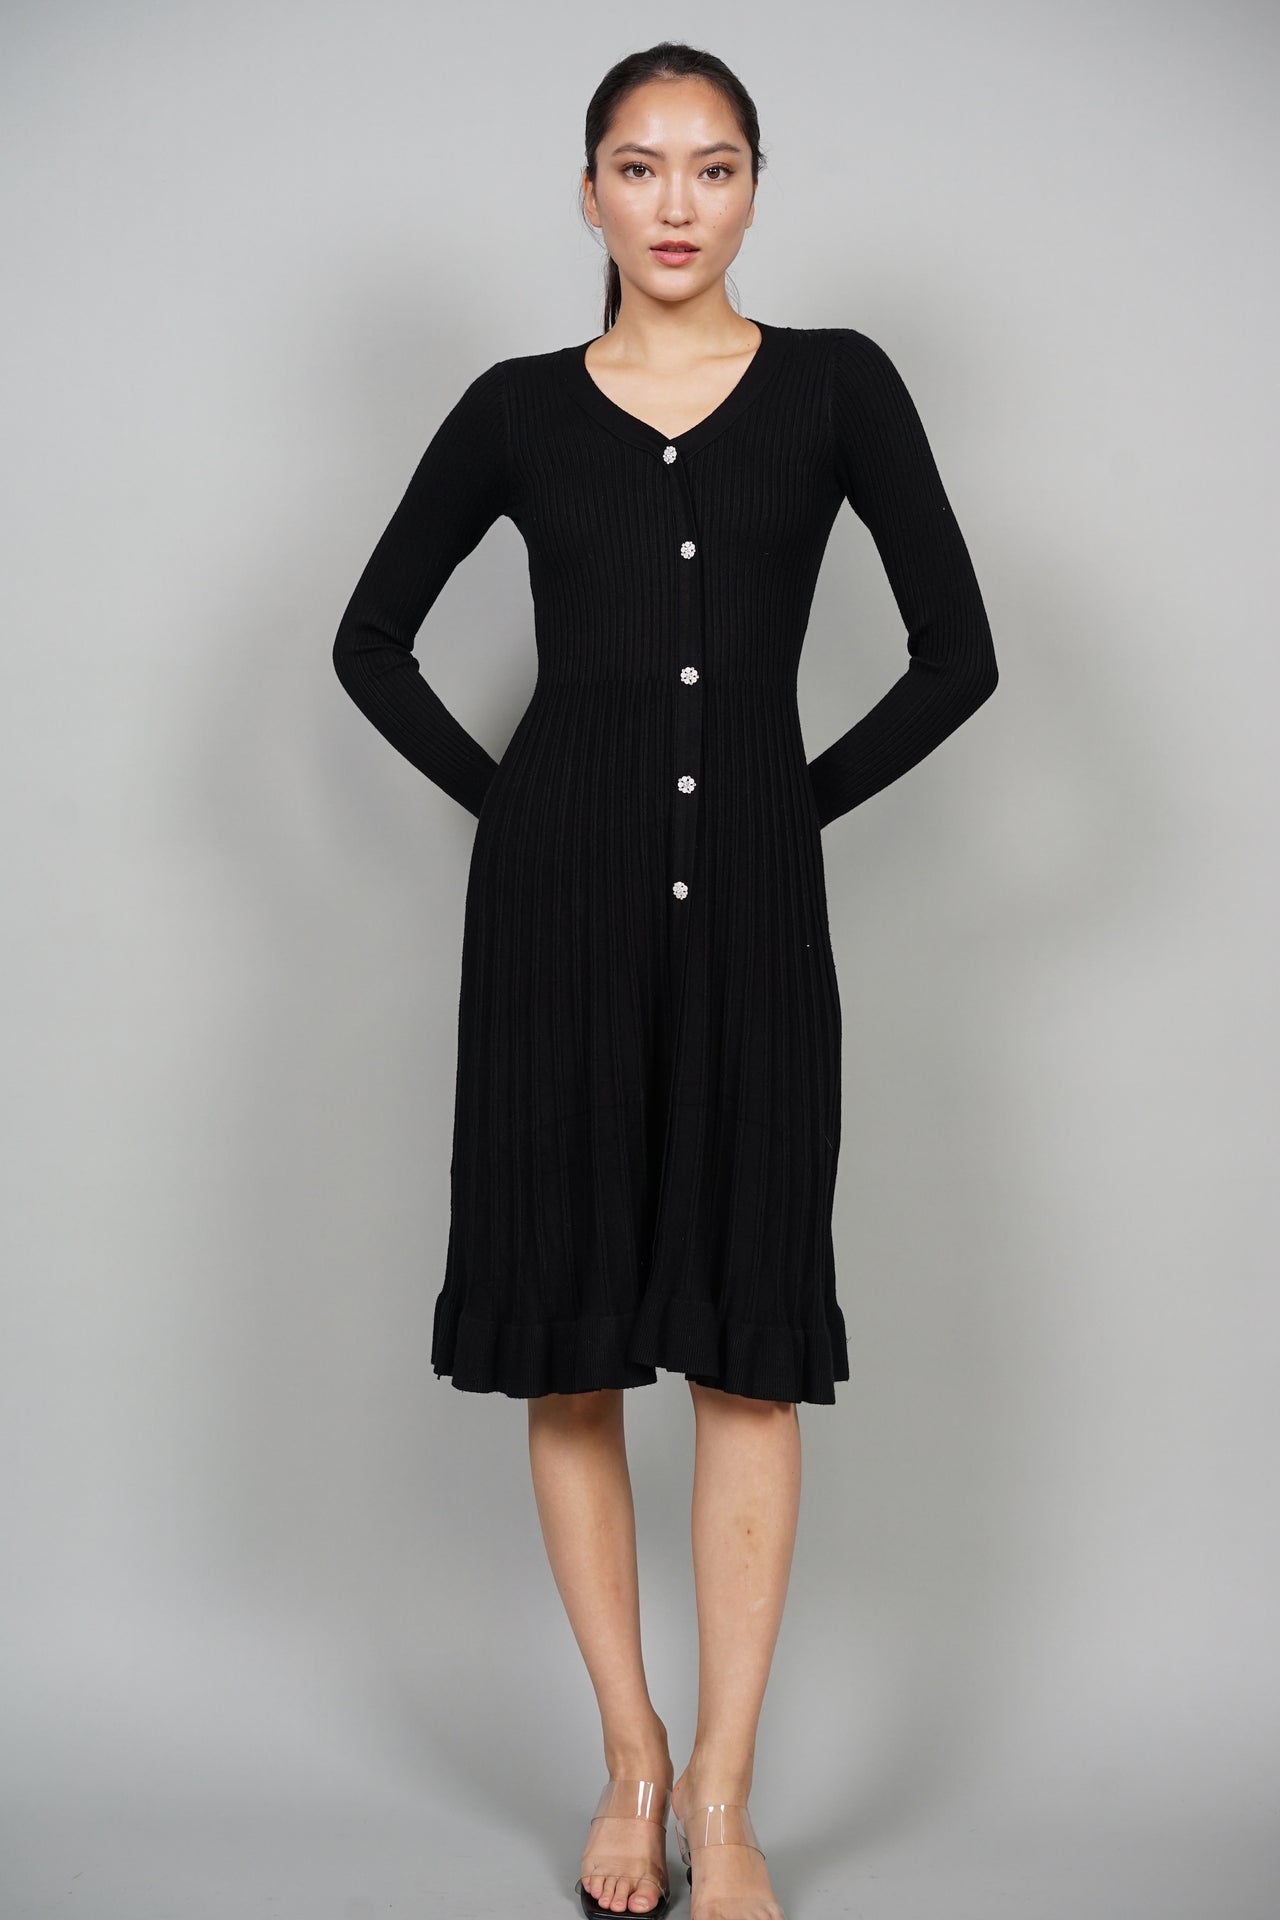 EVERYDAY / Charlie Knit Dress in Black